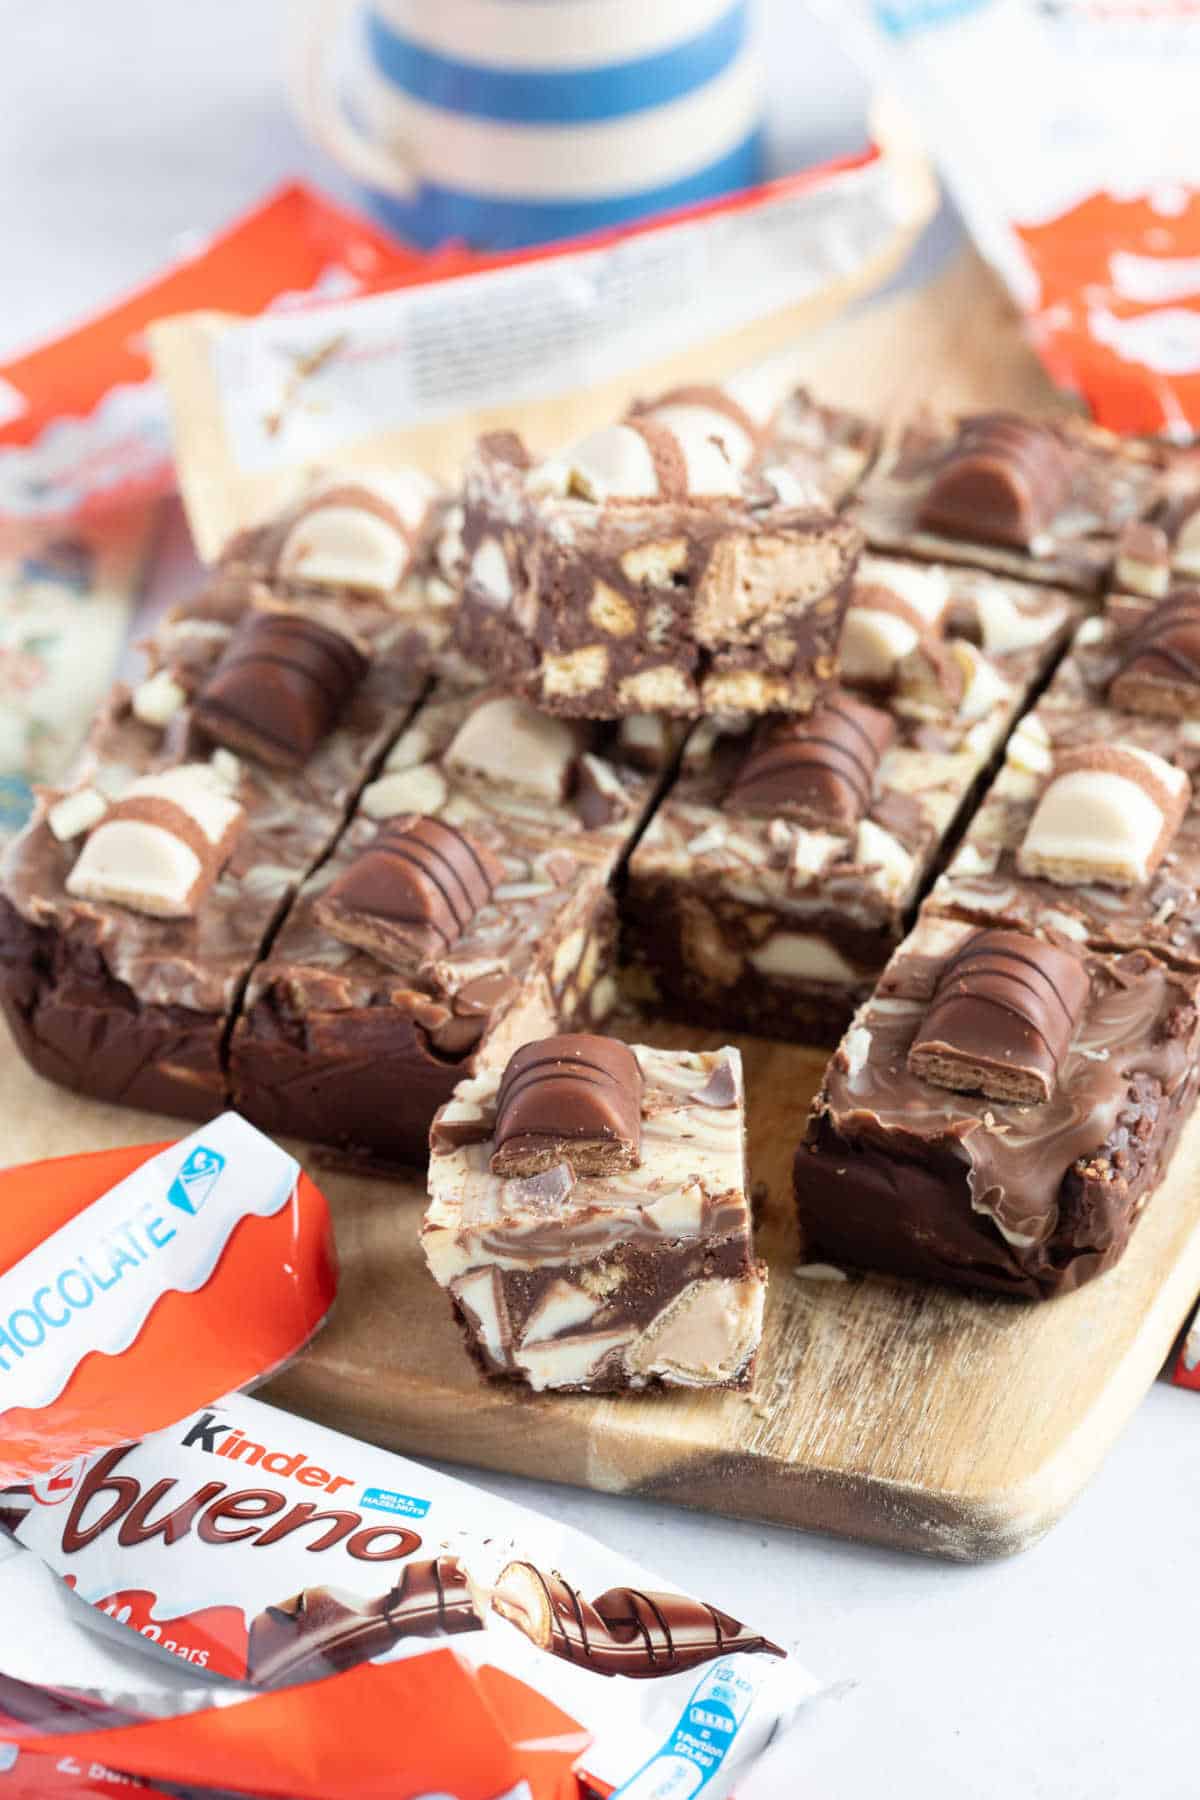 Kinder Bueno tiffin cut into bars on a wooden board.